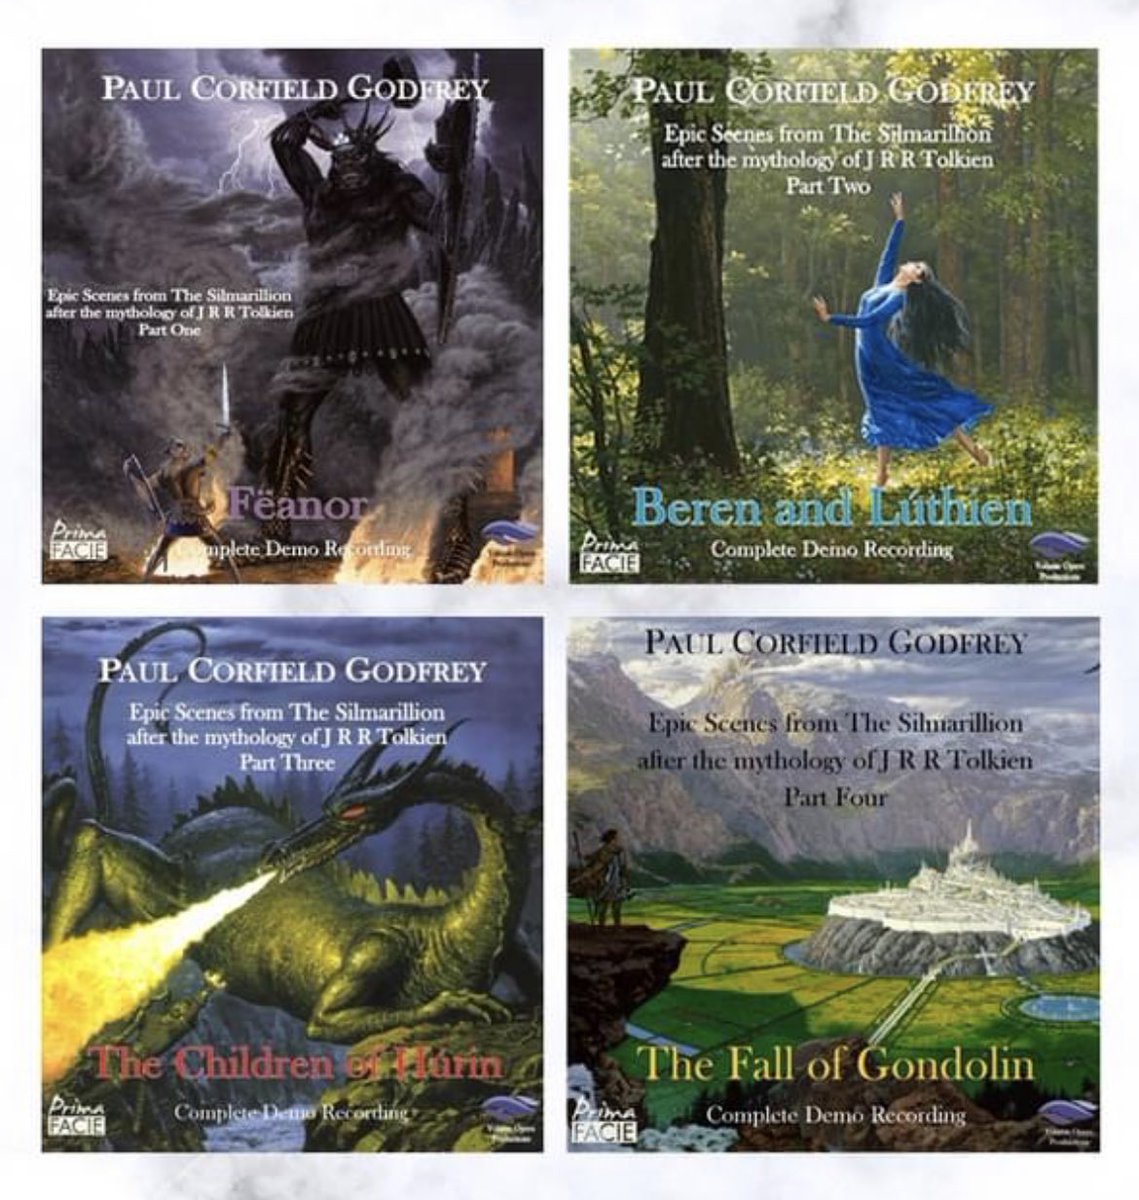 OUT NOW #tolkien #tolkiencollection #tolkienlovers #opera #composers #demorecording #silmarillion #lordoftherings #thehobbit for more info visit paulcorfieldgodfrey.co.uk